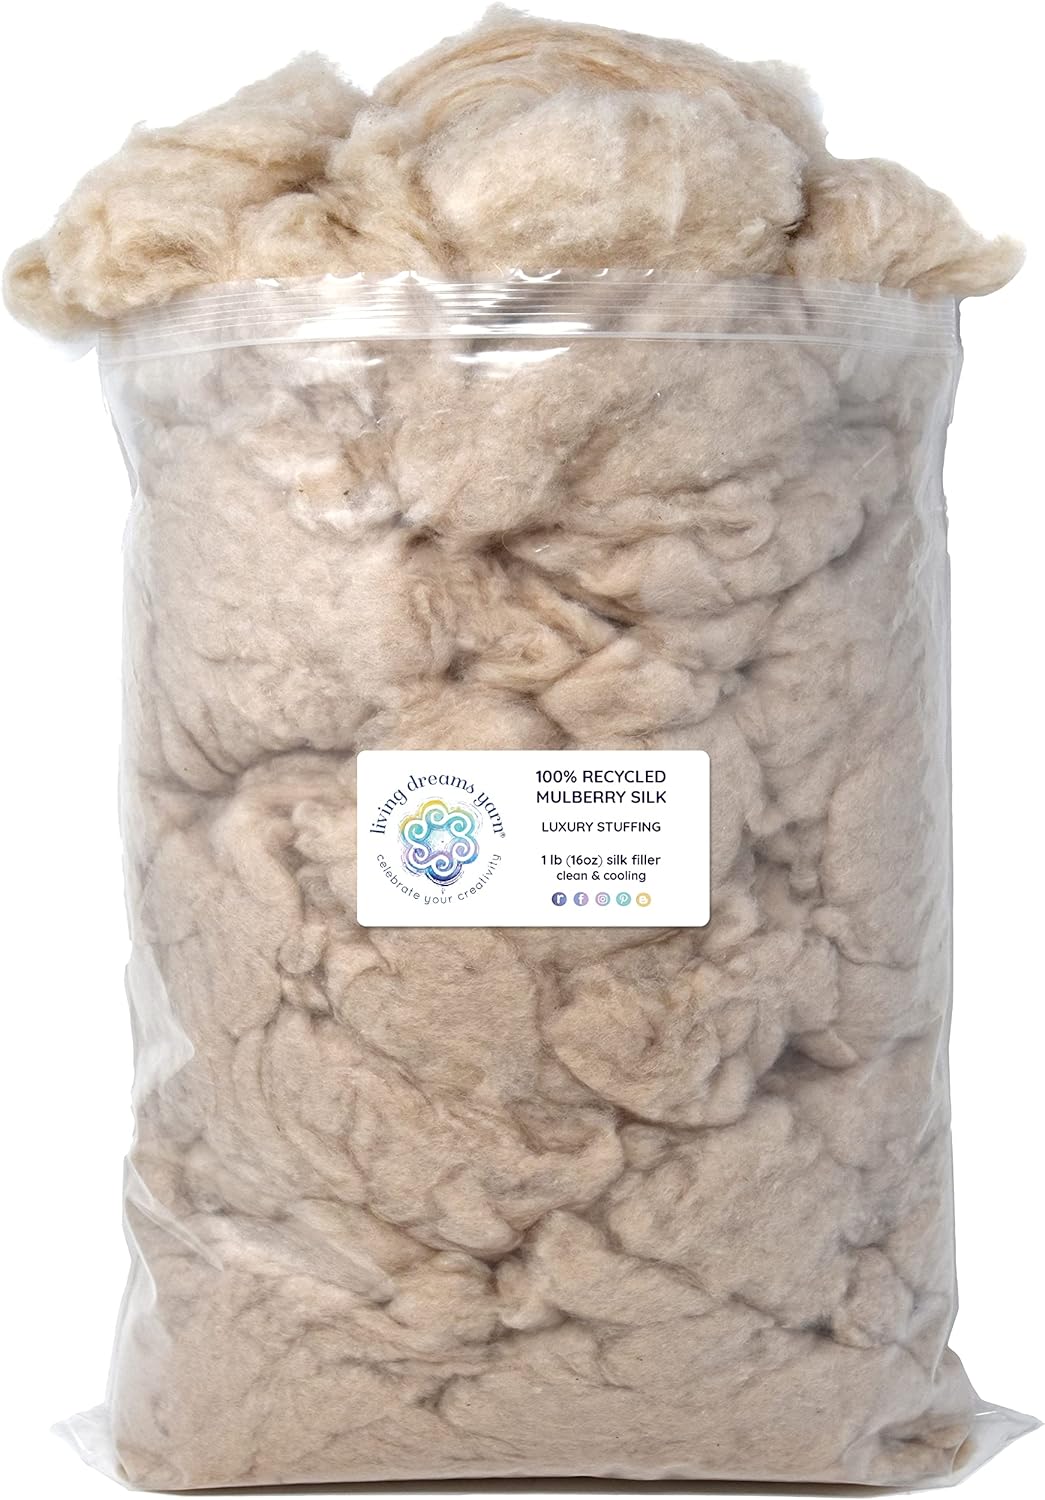 1 lb RECYCLED MULBERRY SILK Filler for Stuffing. Baby Soft, Cooling, Eco-Friendly.